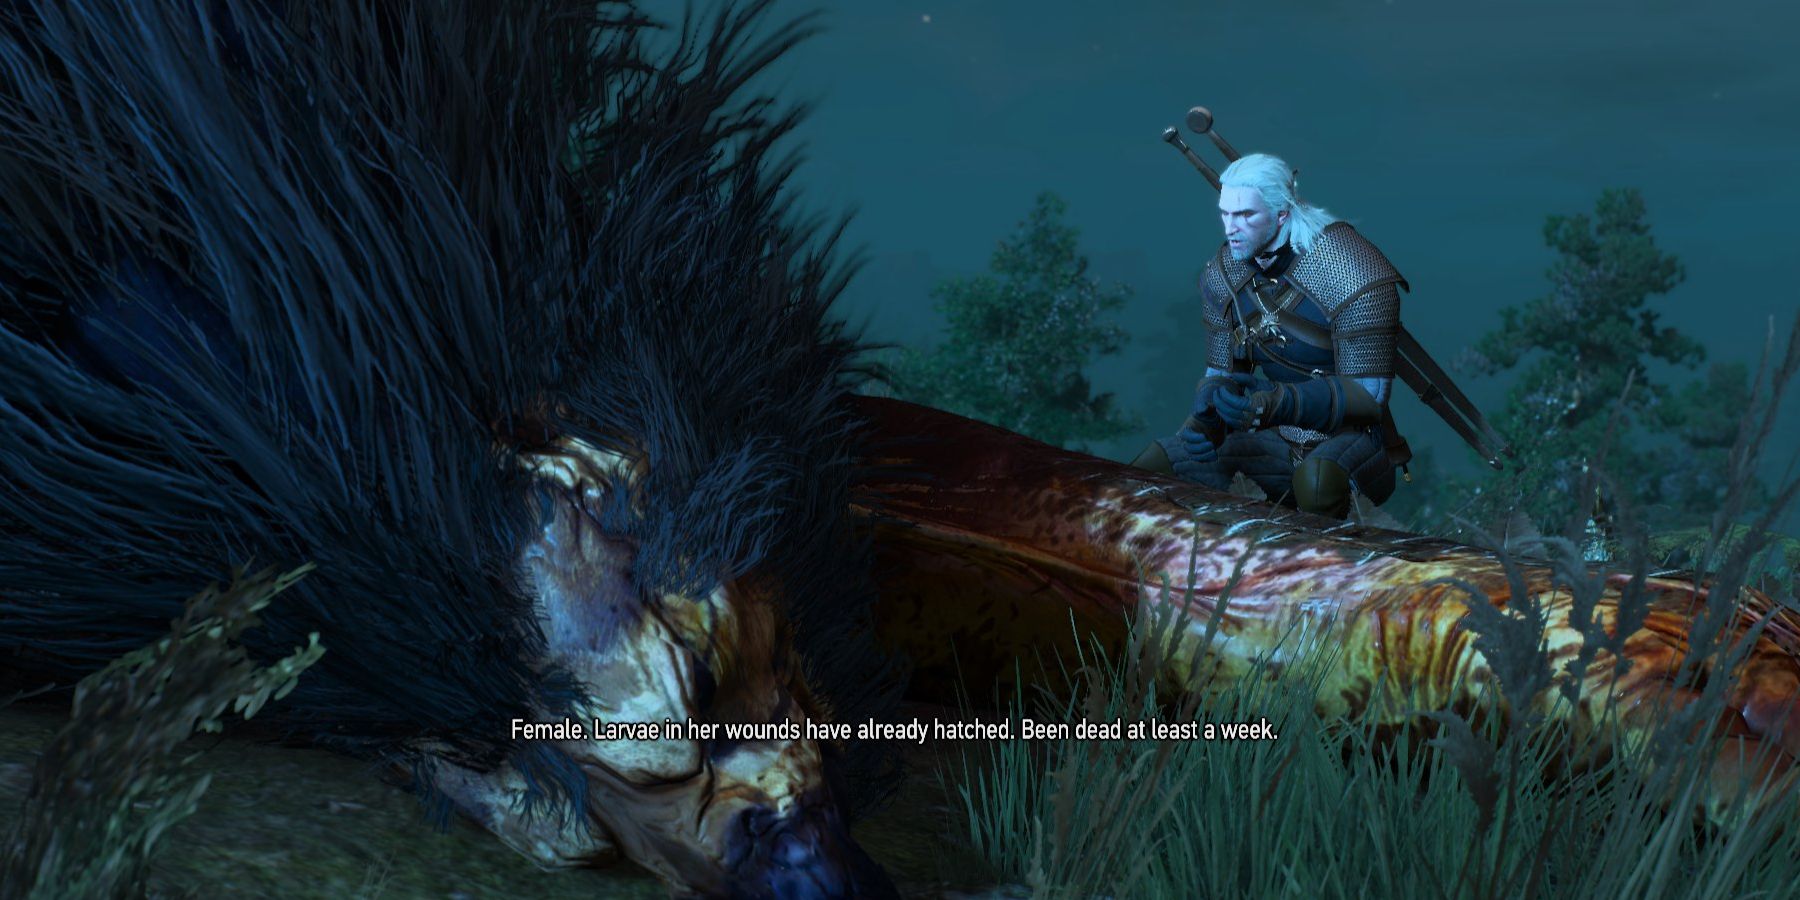 The Witcher 3 Geralt discovers the dead female Griffin